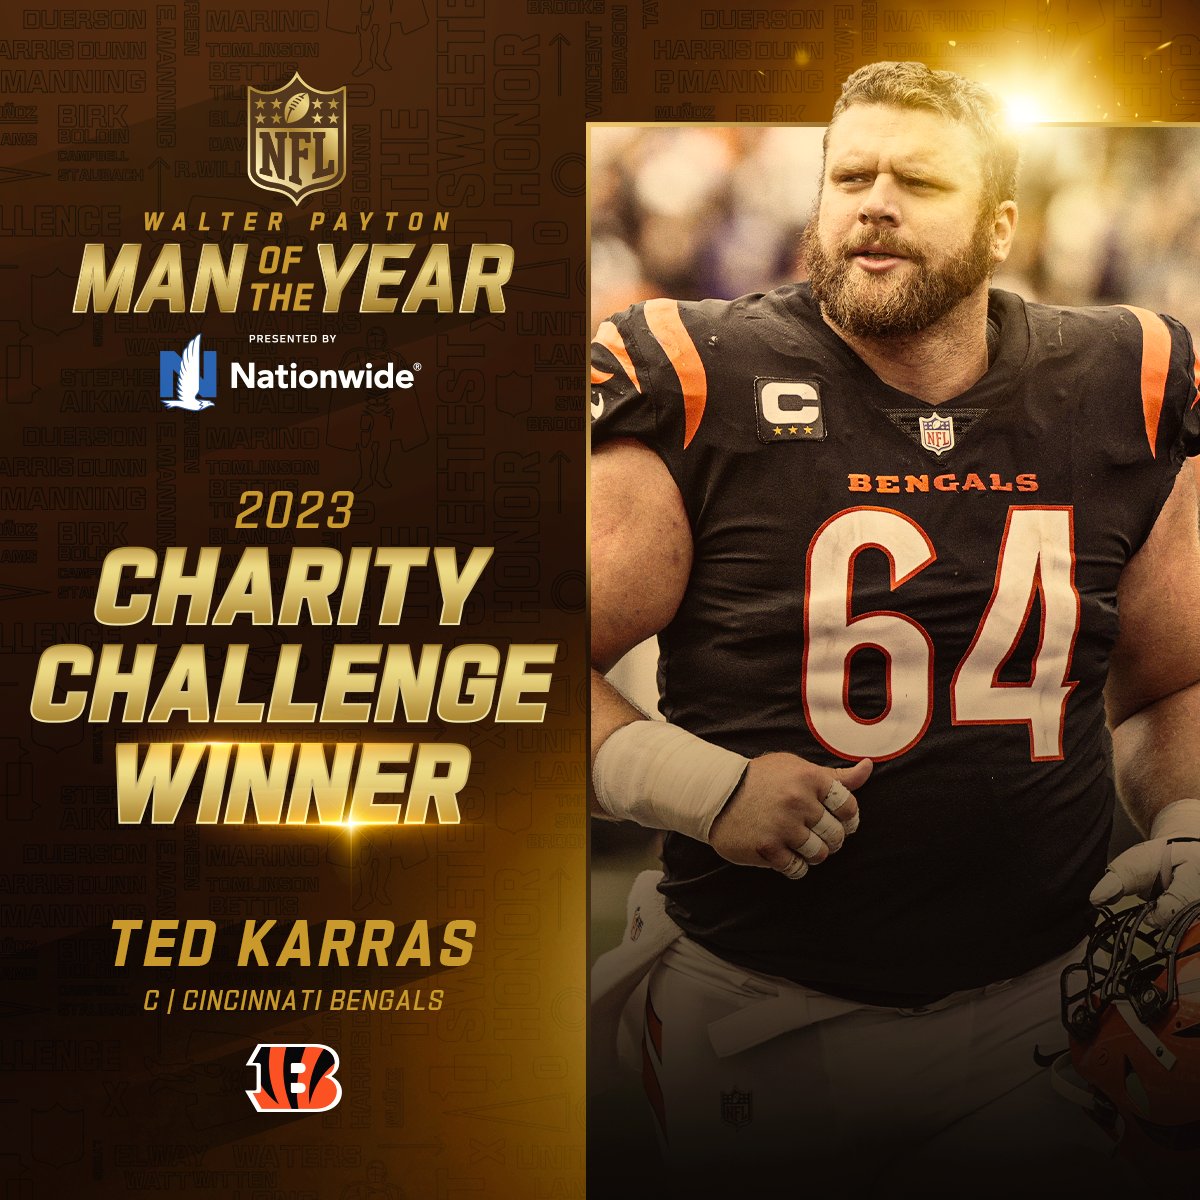 Congratulations to @_teddy_k for winning the #WPMOYChallenge! He will win an additional $35K donation to the @VillageofMerici, courtesy of @Nationwide.

Tune in to #NFLHonors on Thursday, Feb. 8 on CBS/NFLN to find out who will win this year’s #WPMOY award!